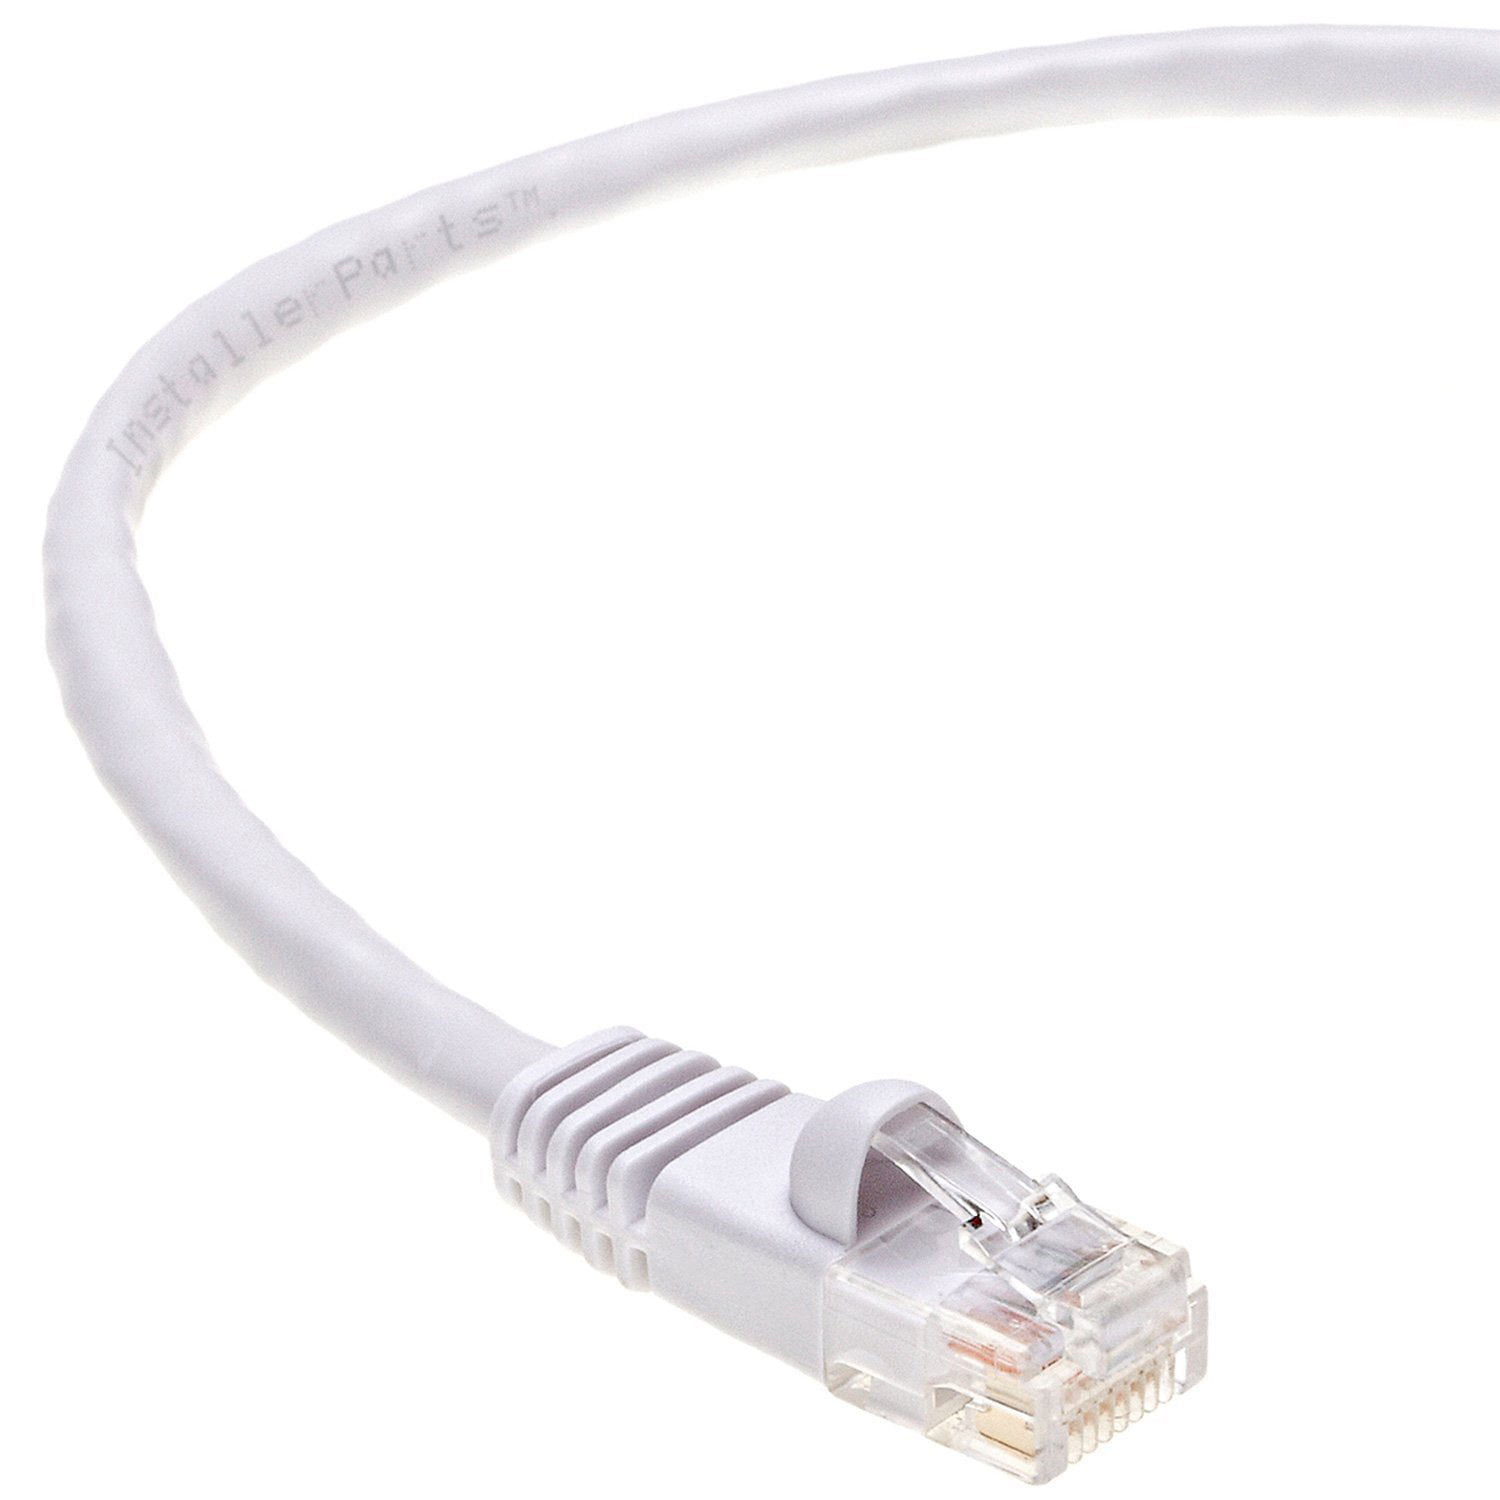 Orange 100 Pack Ethernet Cable CAT5E Cable UTP Non-Booted 3 FT 350MHZ Professional Series InstallerParts 1Gigabit/Sec Network/Internet Cable